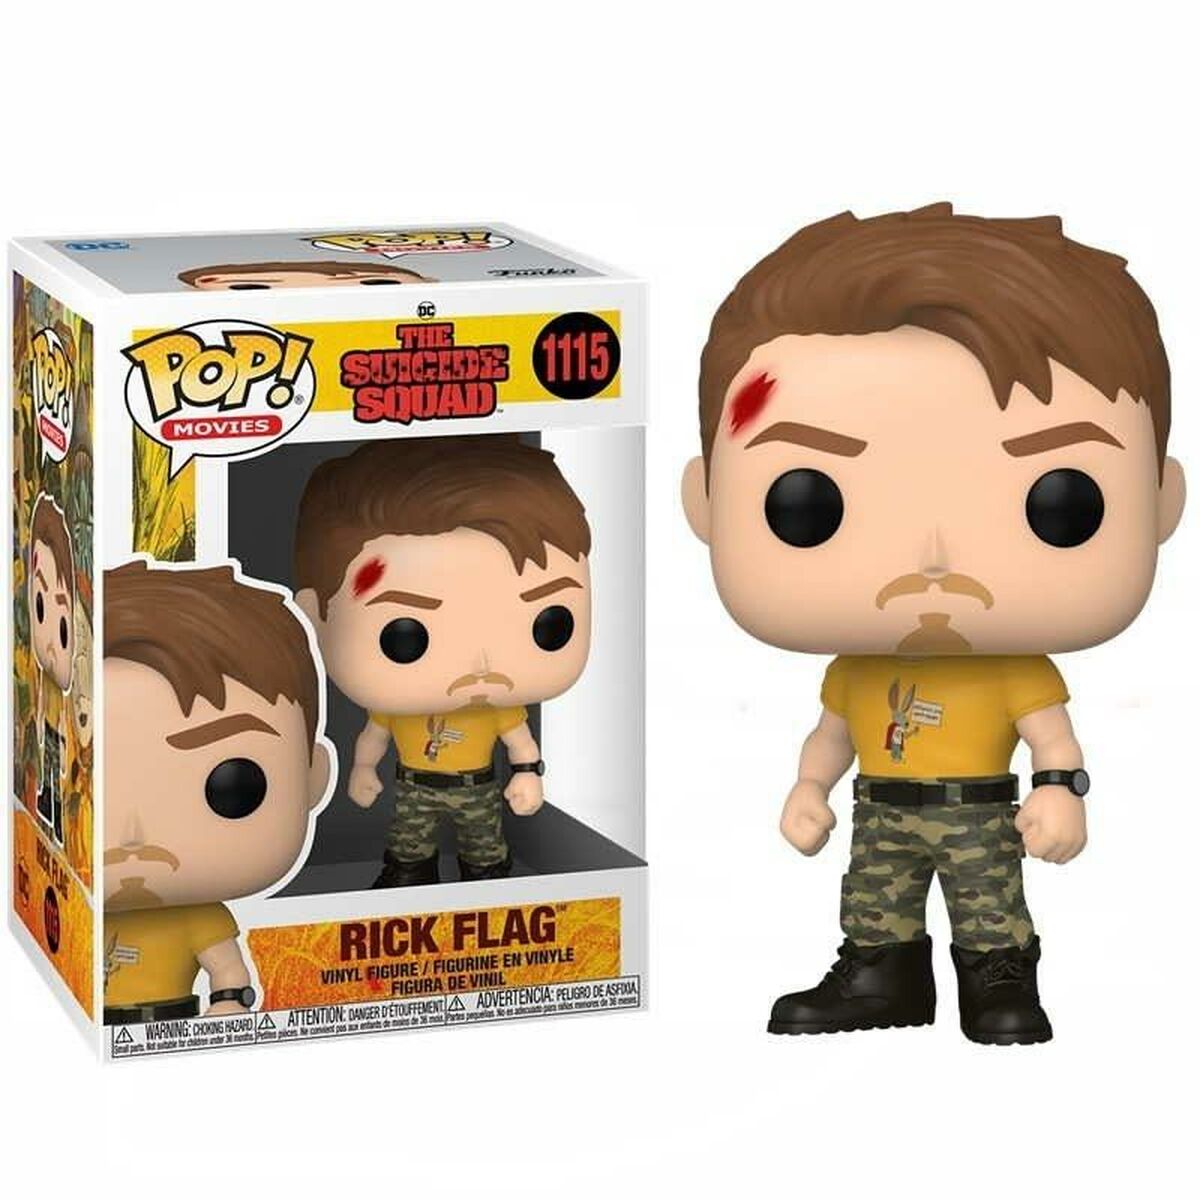 Collectable Figures Funko The Suicide Squad - Rick Flag Nº1115